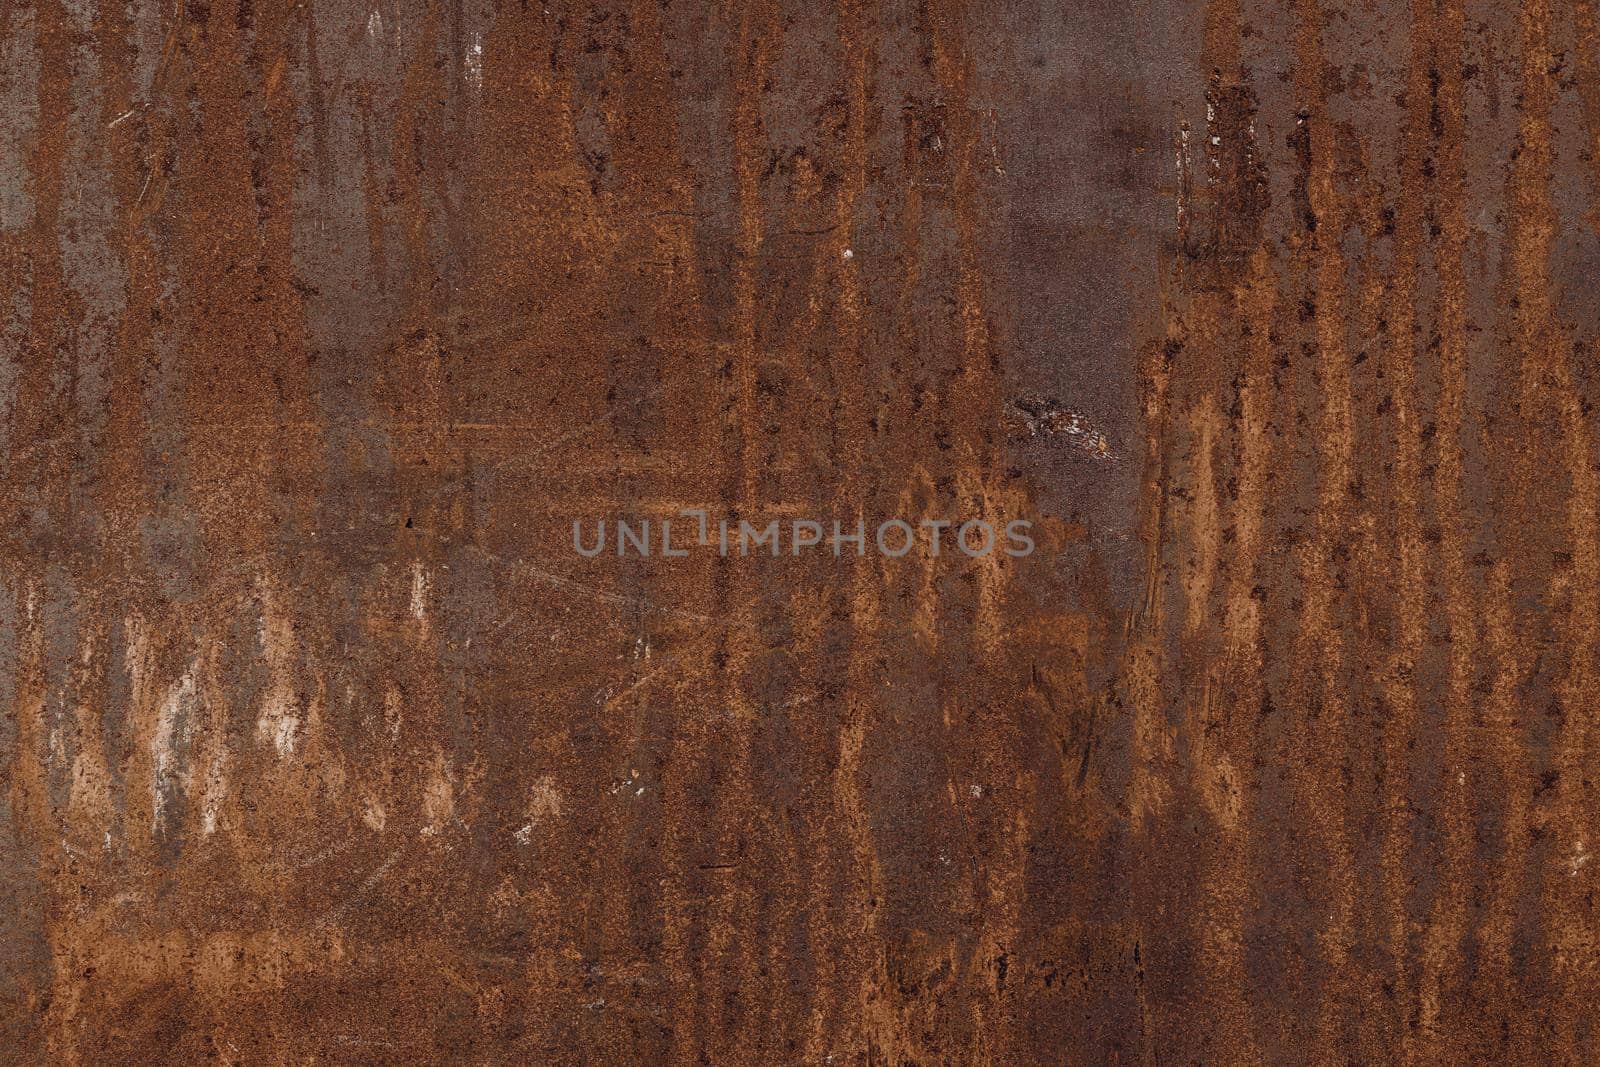 Old rusty metal wall panel, Iron rust texture for background.